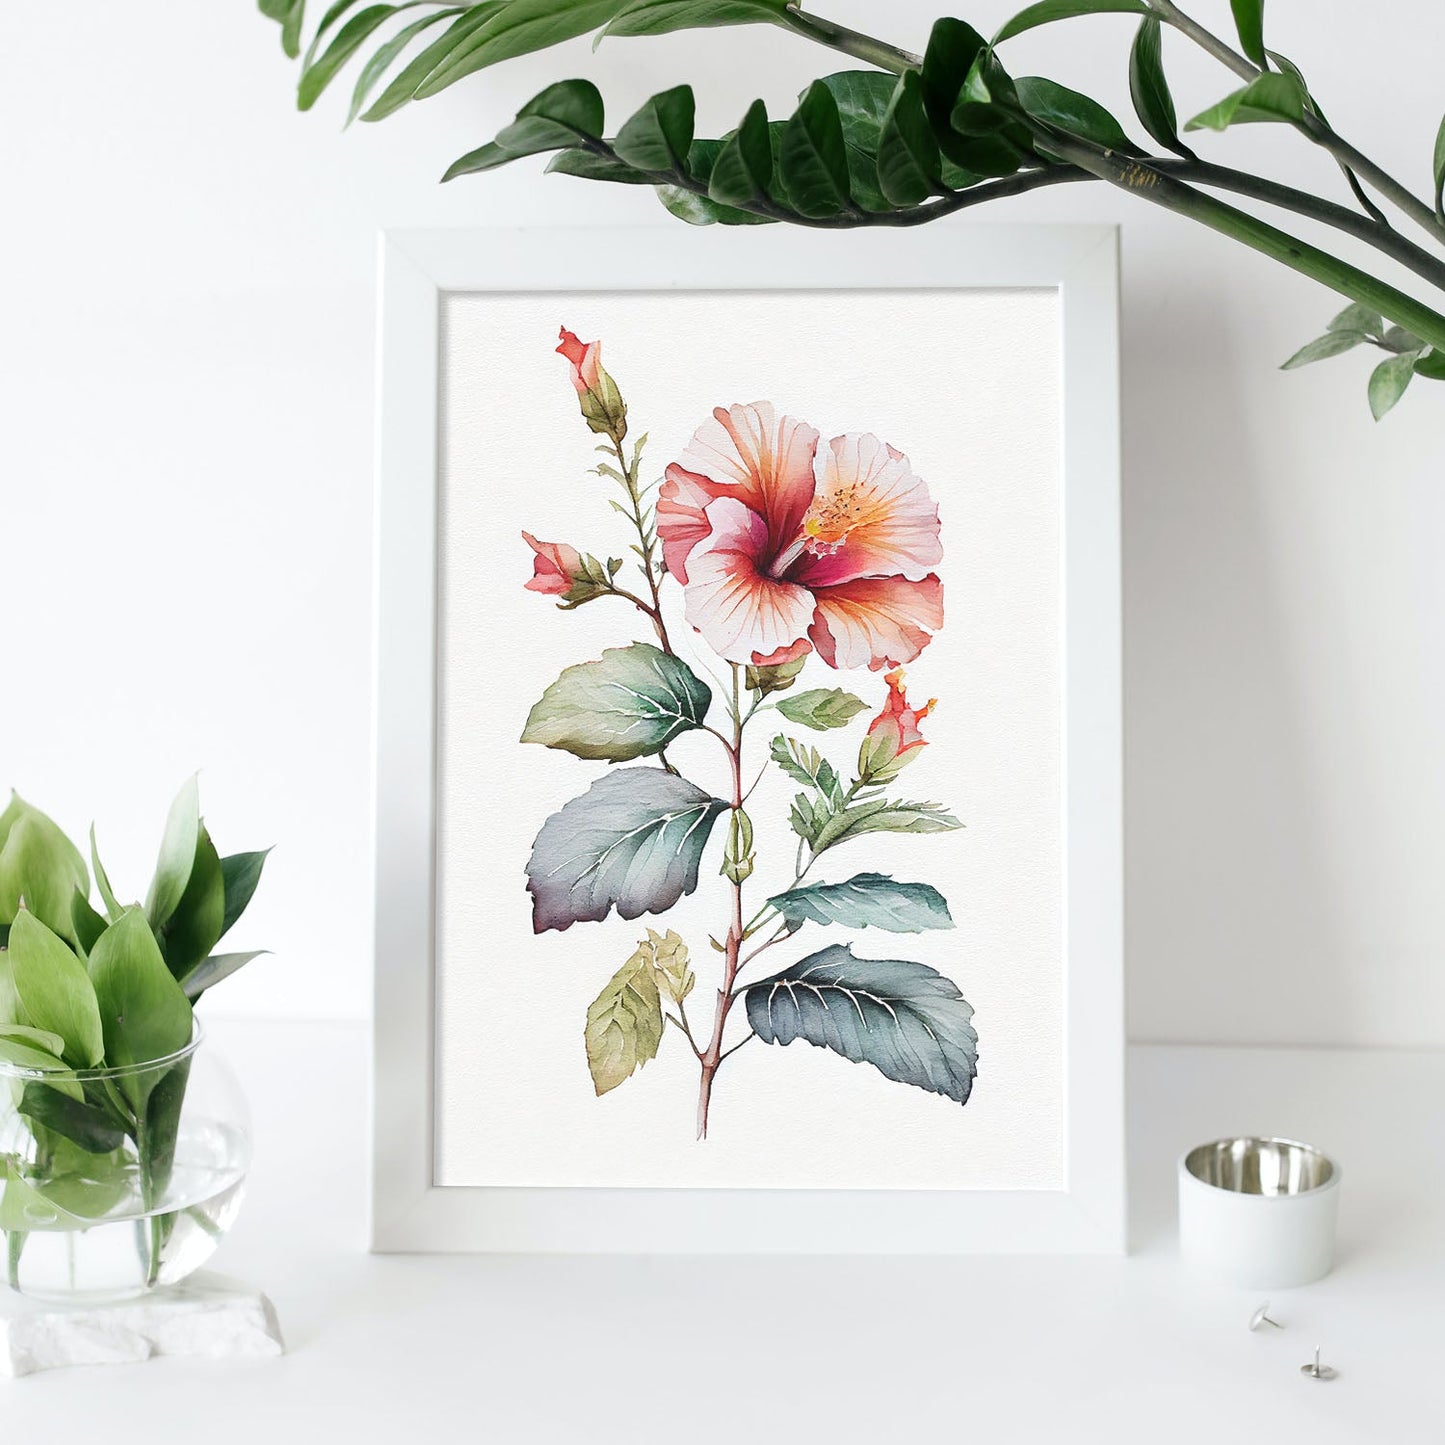 Nacnic watercolor minmal Hibiscus_2. Aesthetic Wall Art Prints for Bedroom or Living Room Design.